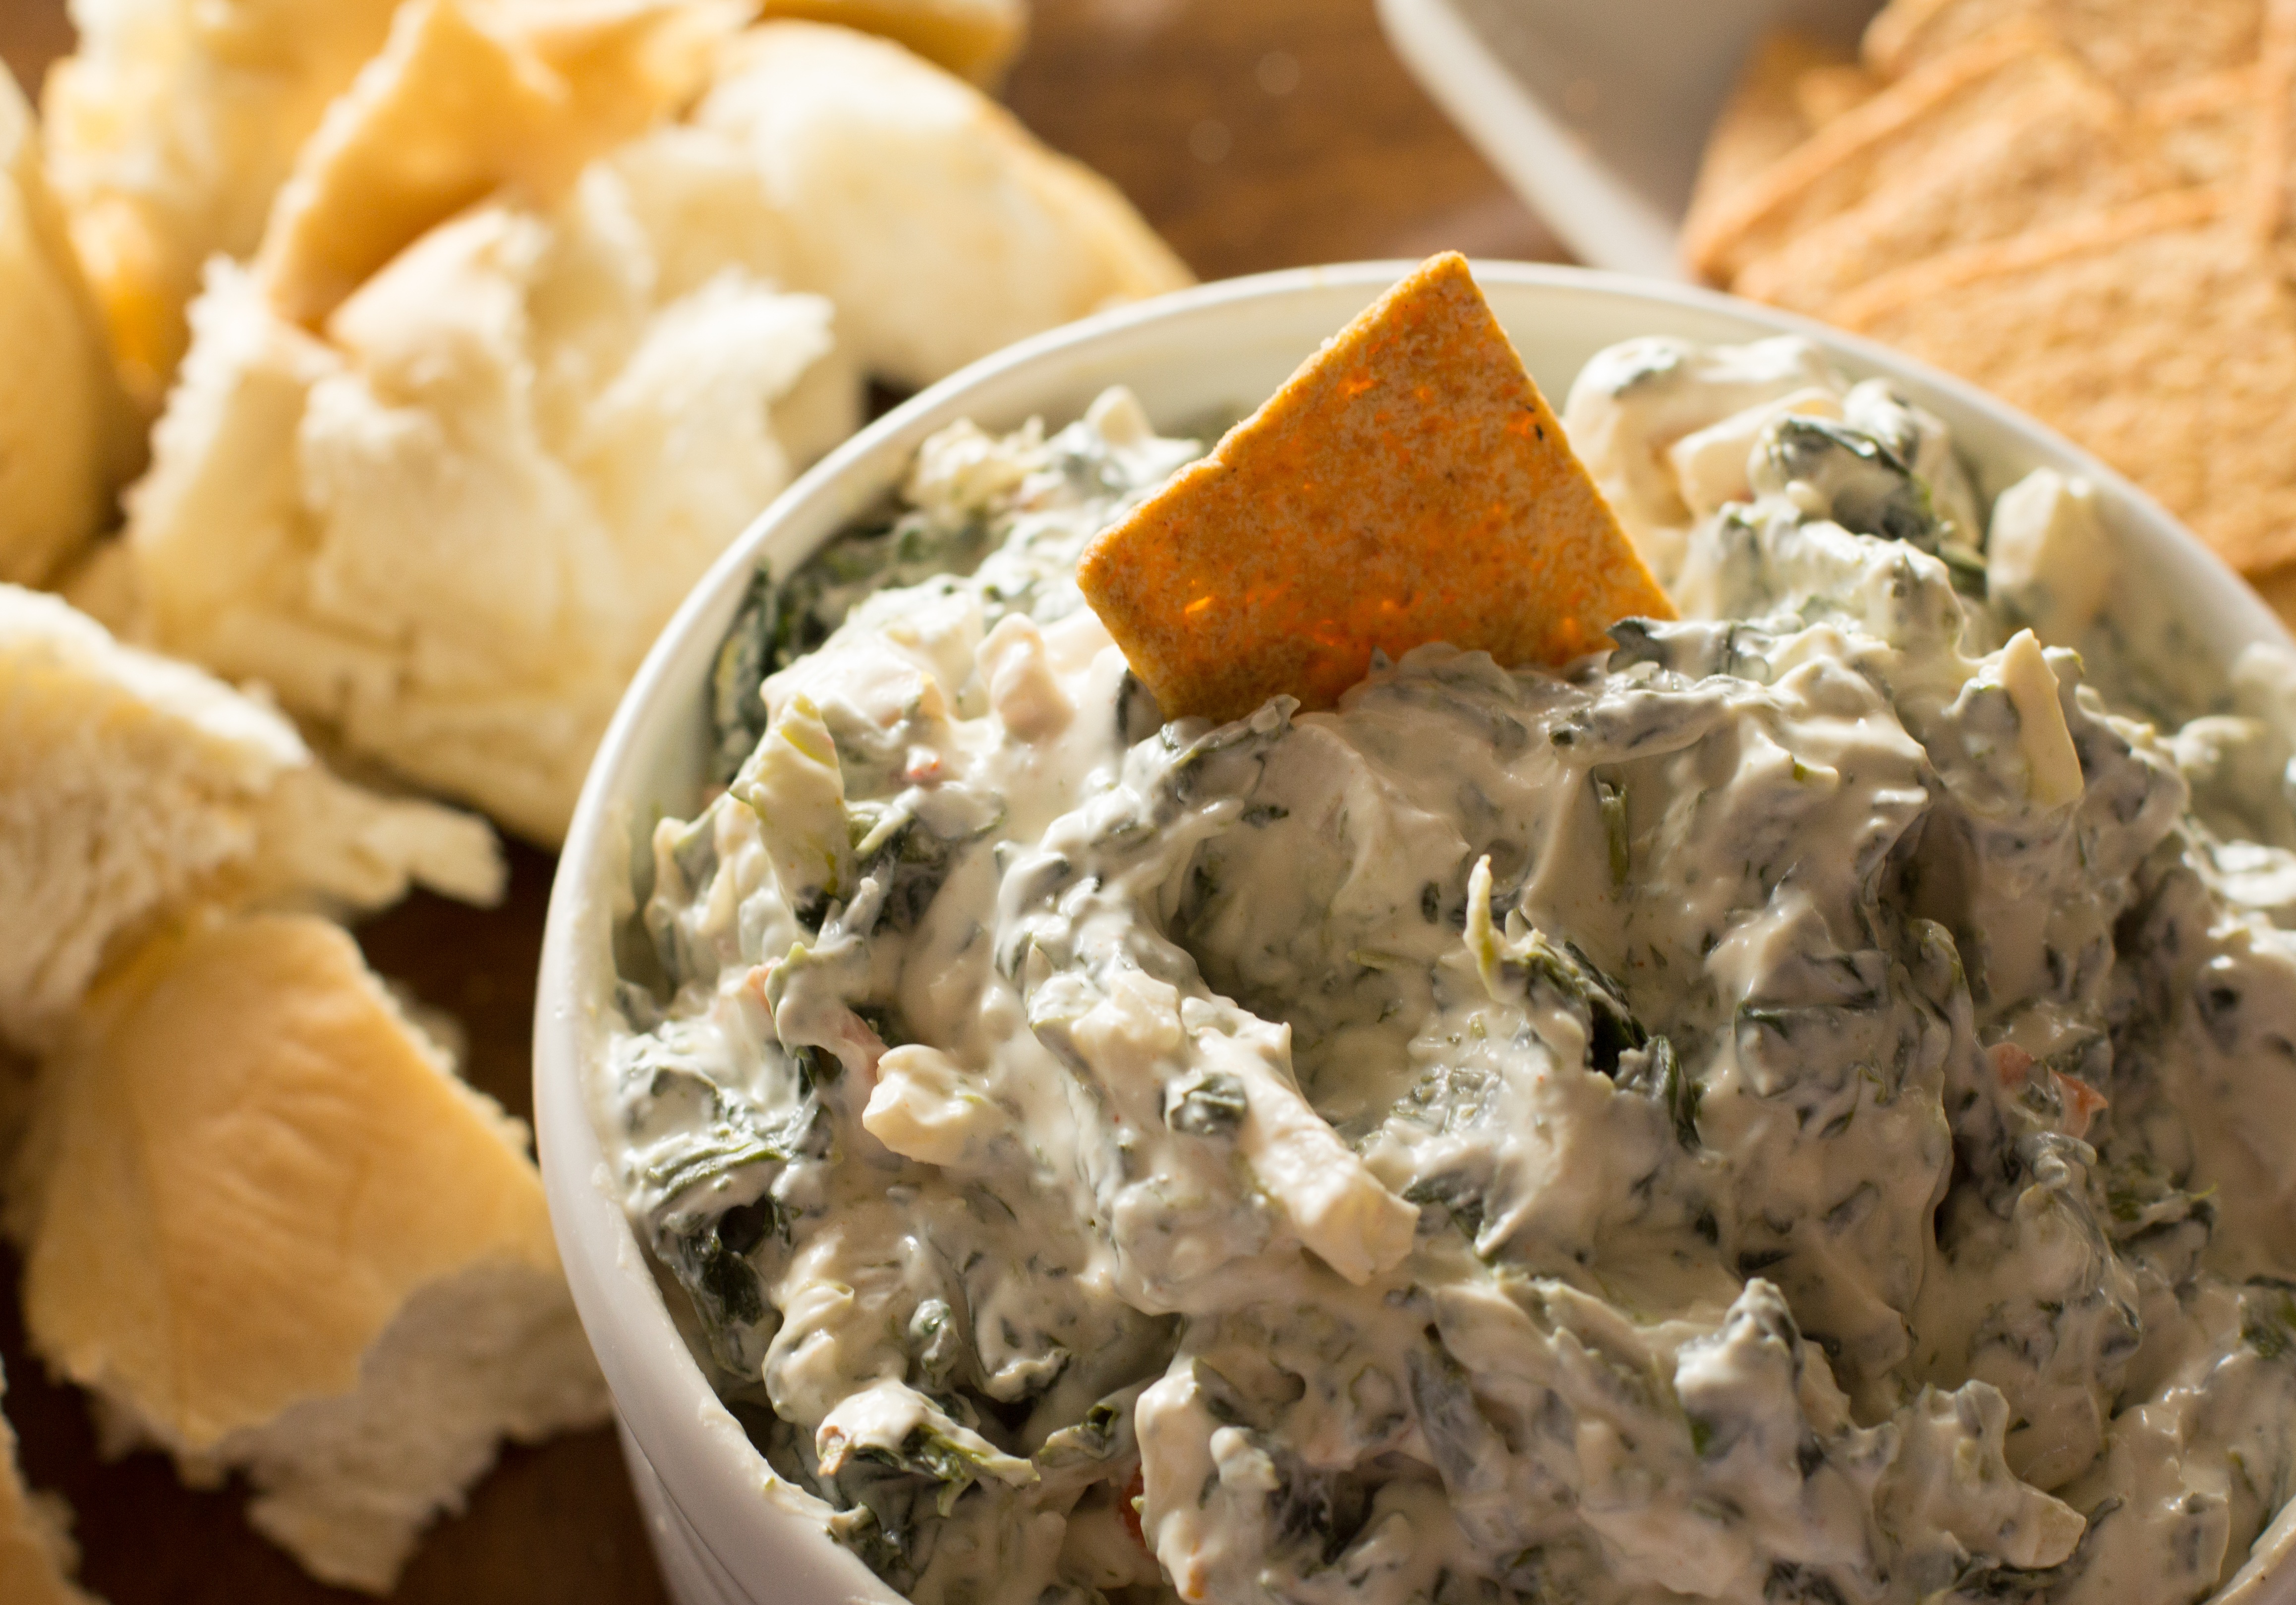 Knorr's Spinach Dip